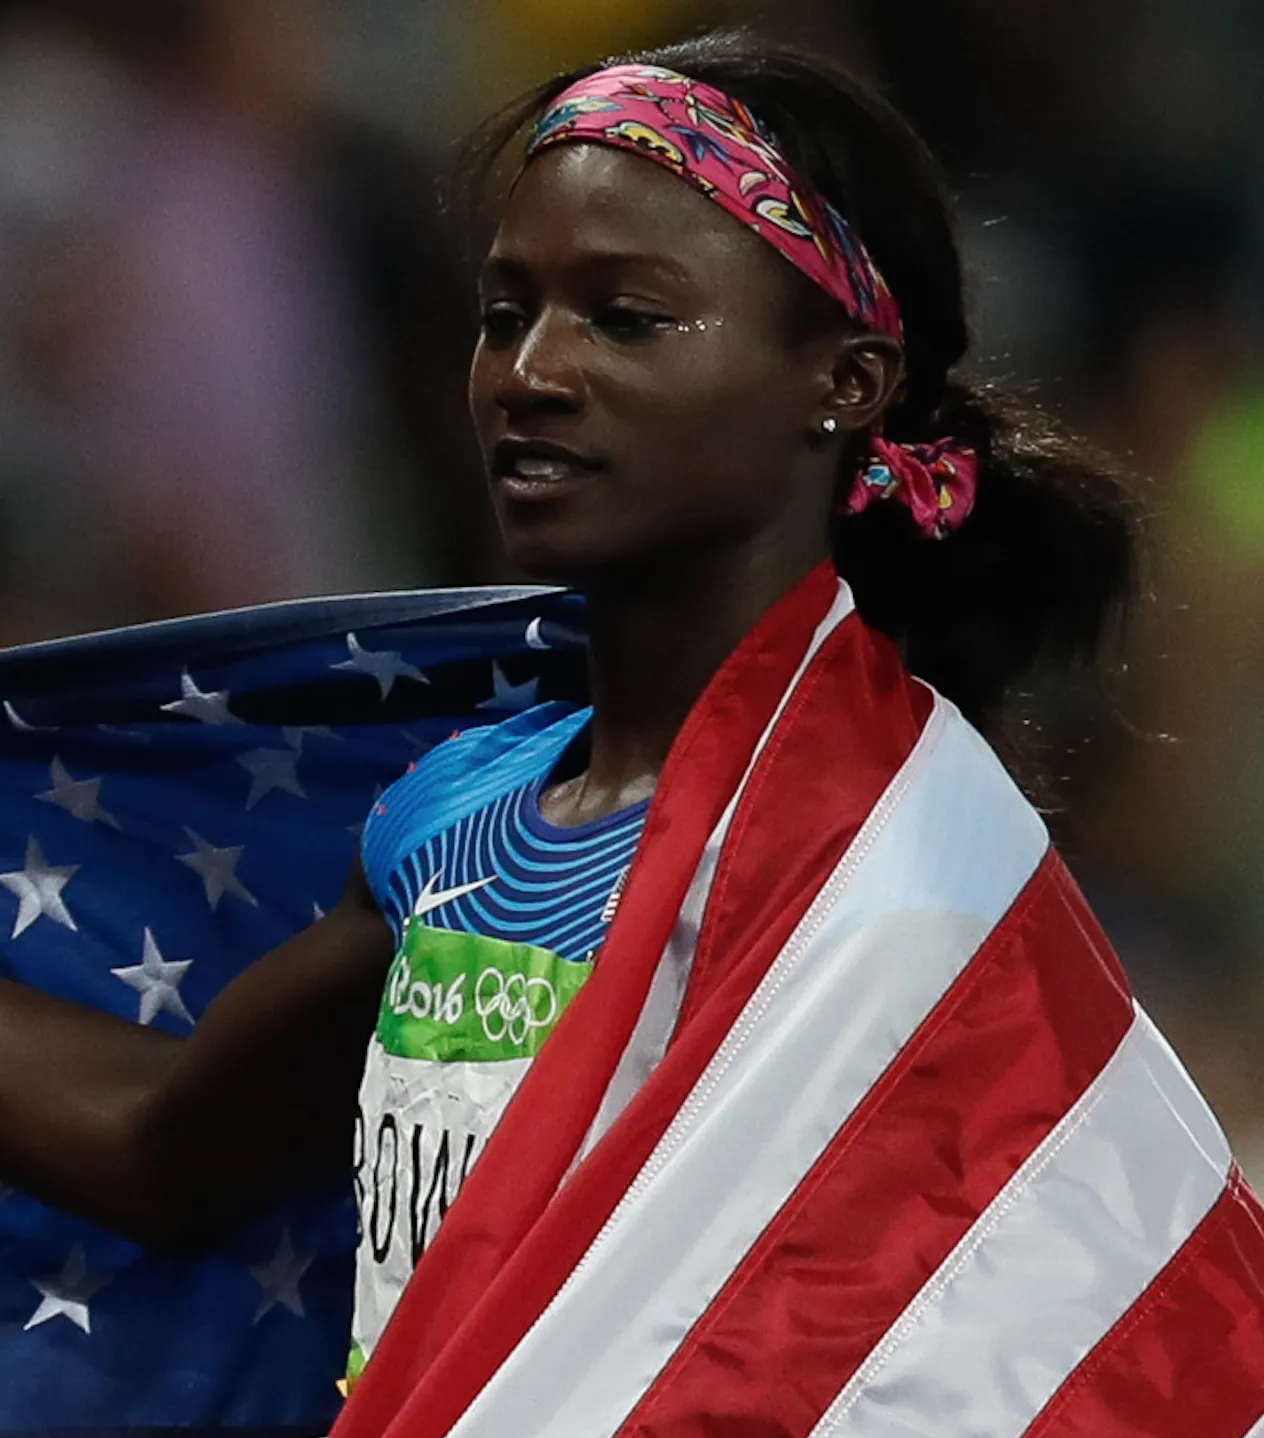 Olympic champion Tori Bowie died due to childbirth complications